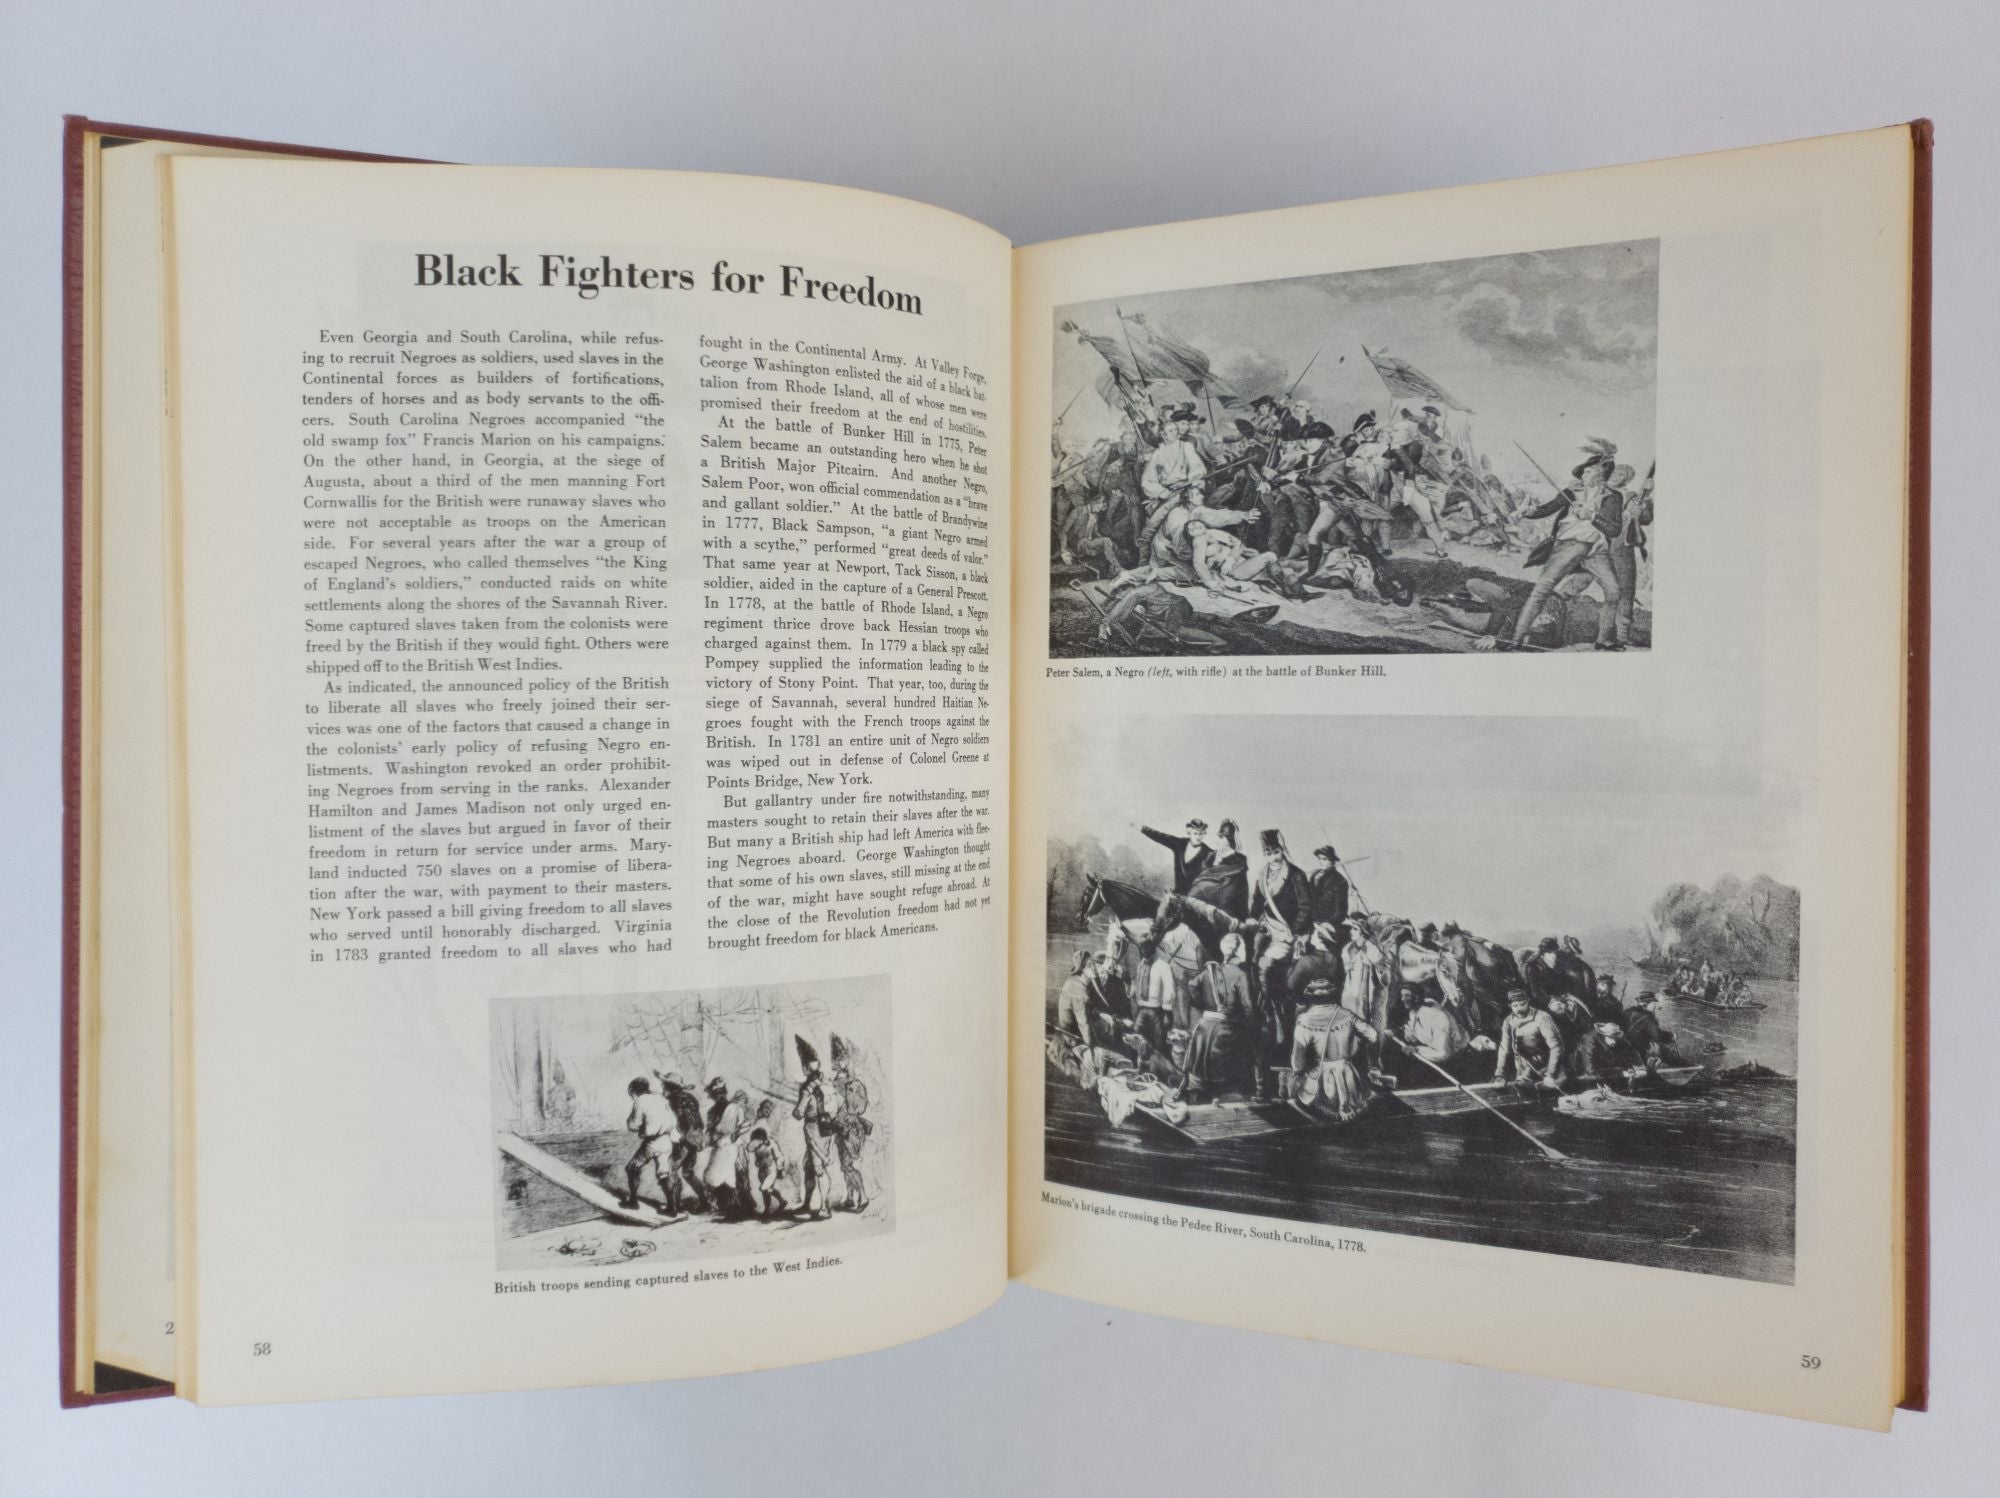 Product Image for A PICTORIAL HISTORY OF THE NEGRO IN AMERICA [Inscribed to Lisle Carter]